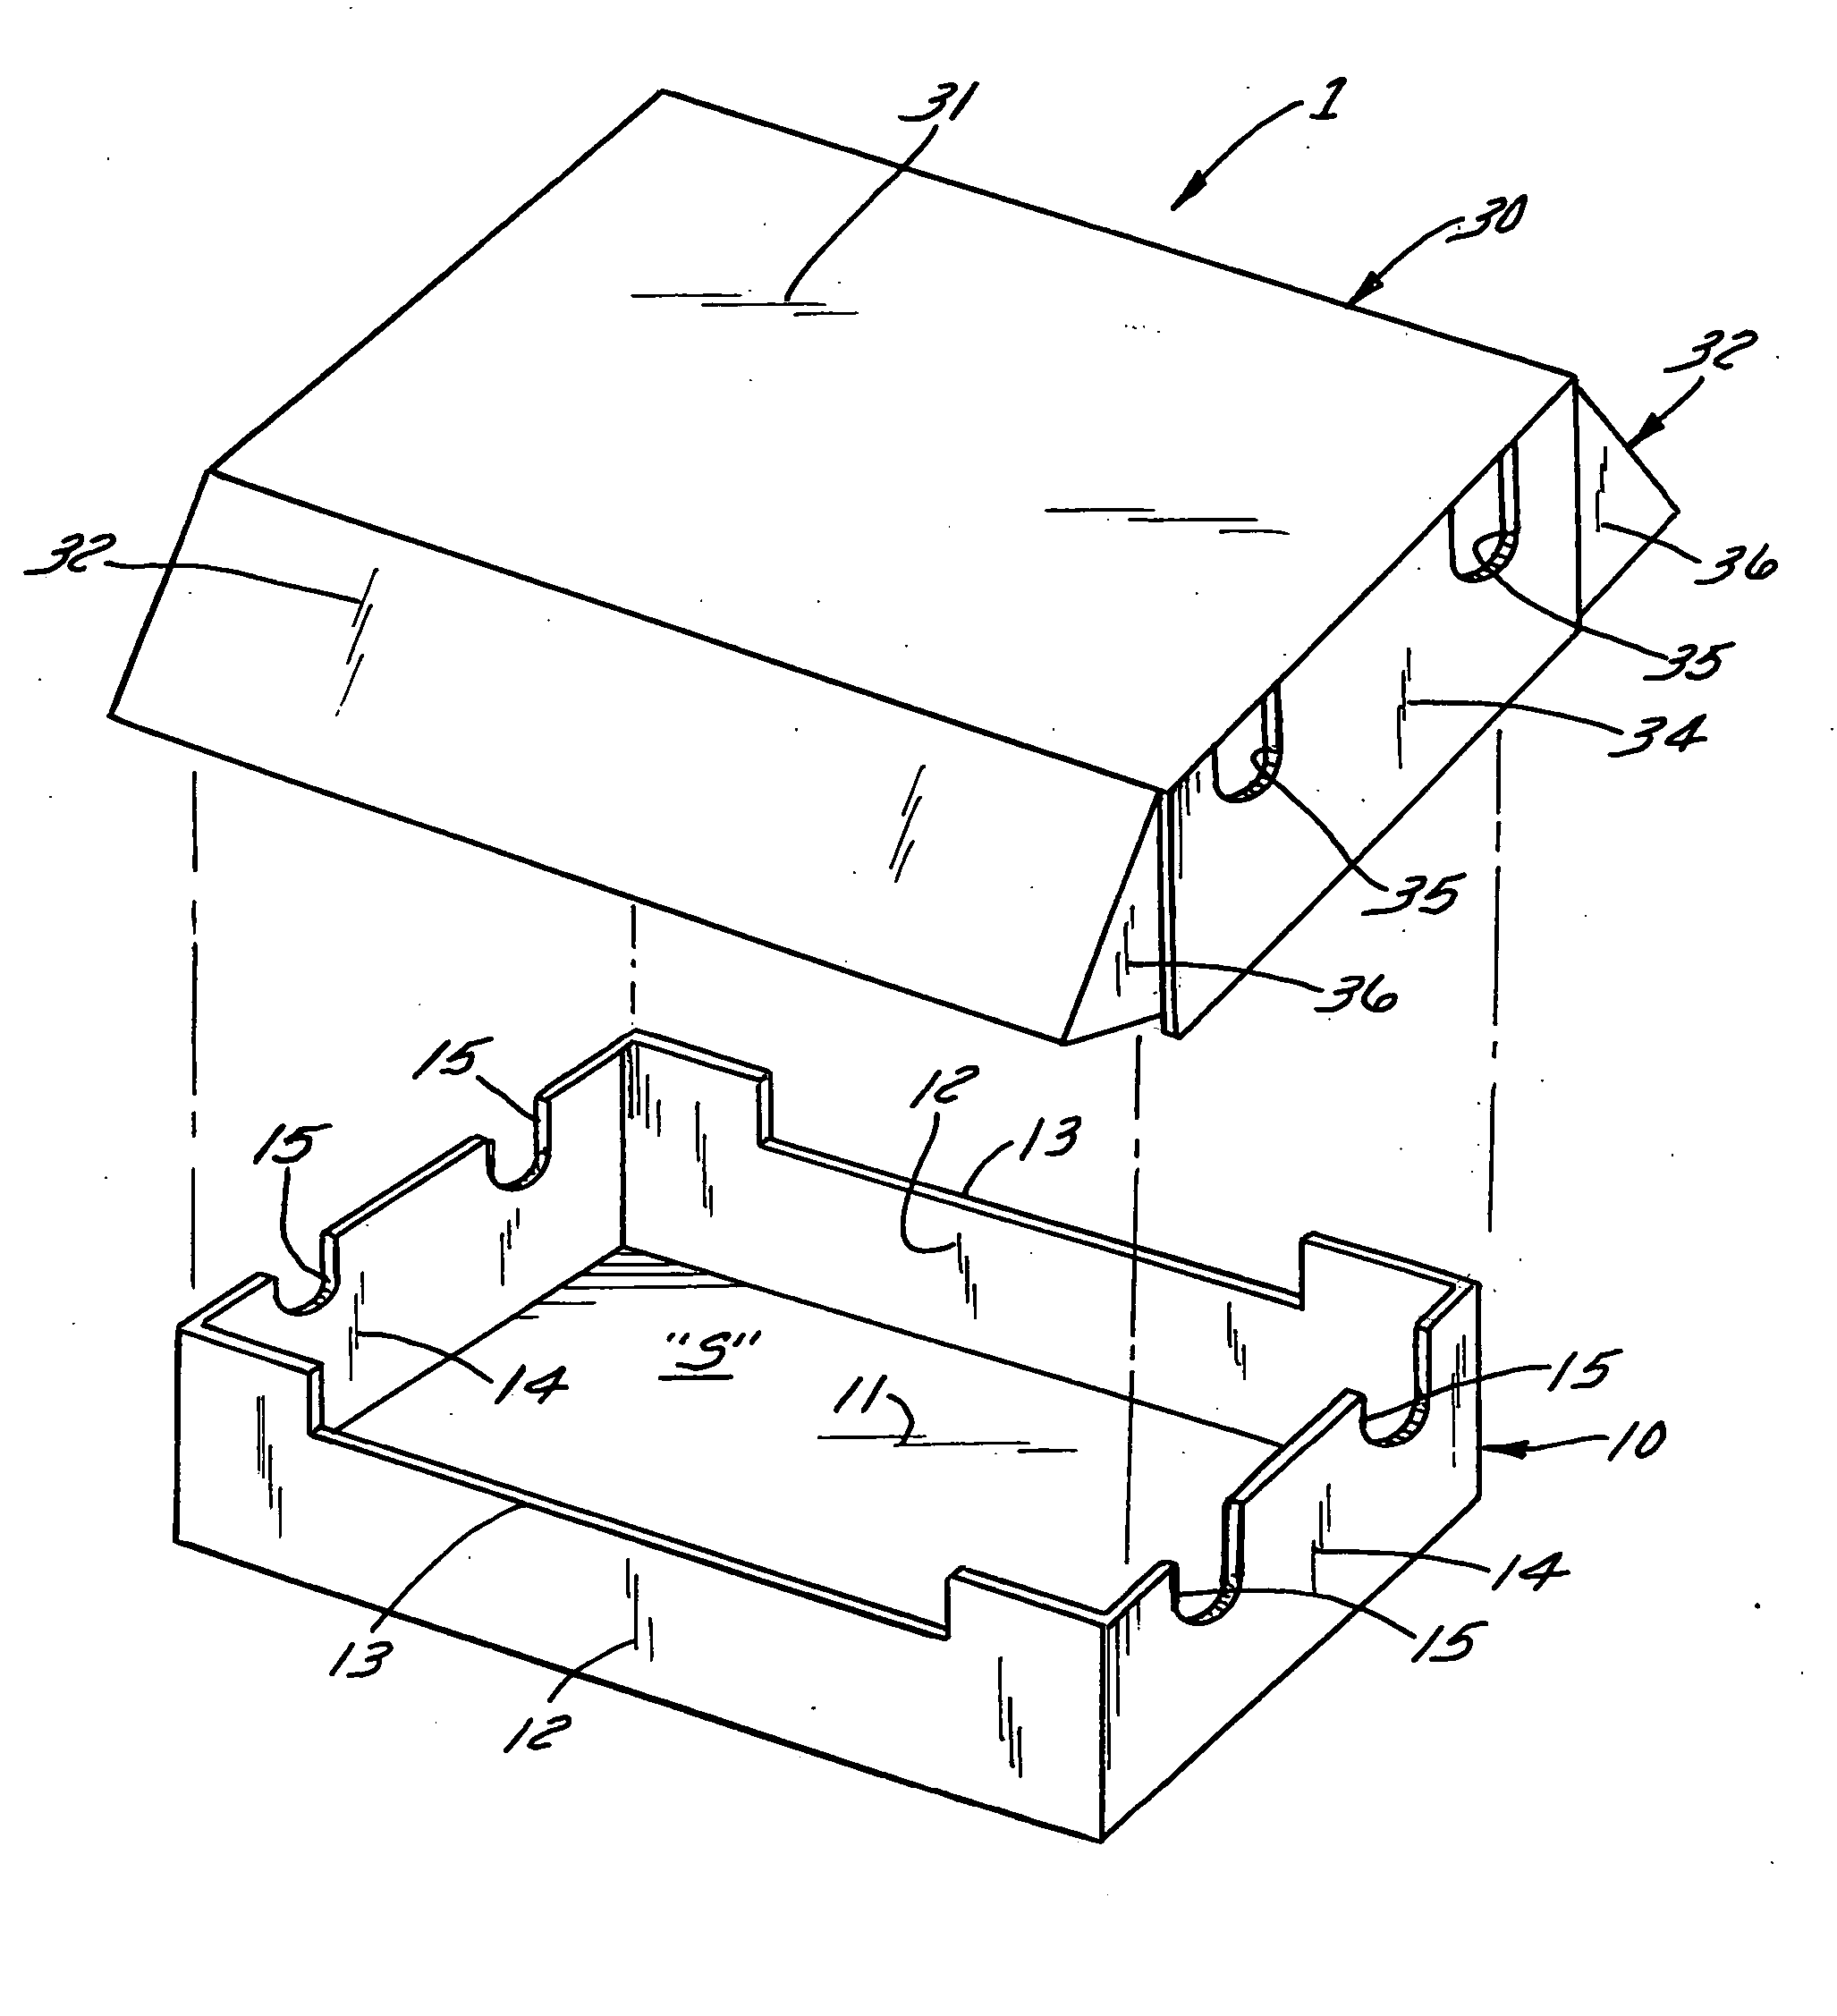 Container with hold-open flaps for ventilation